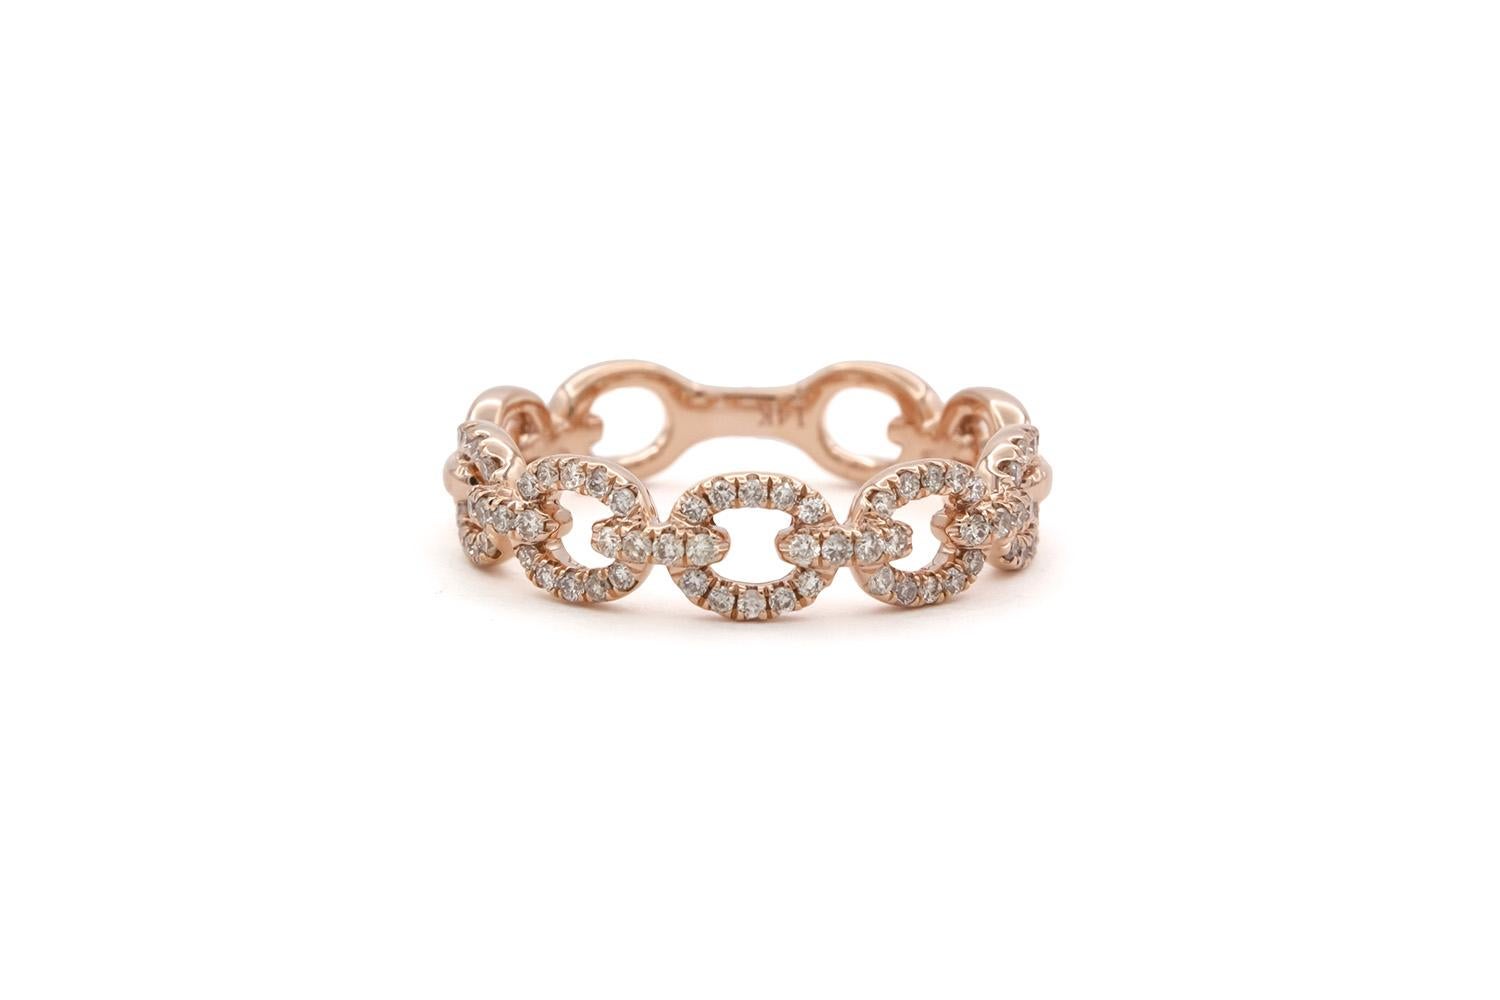 We are pleased to offer this Brand New Solid 14k Rose Gold & Diamond Ladies Paperclip Stacking Fashion Ring. This beautiful ring features the super popular 